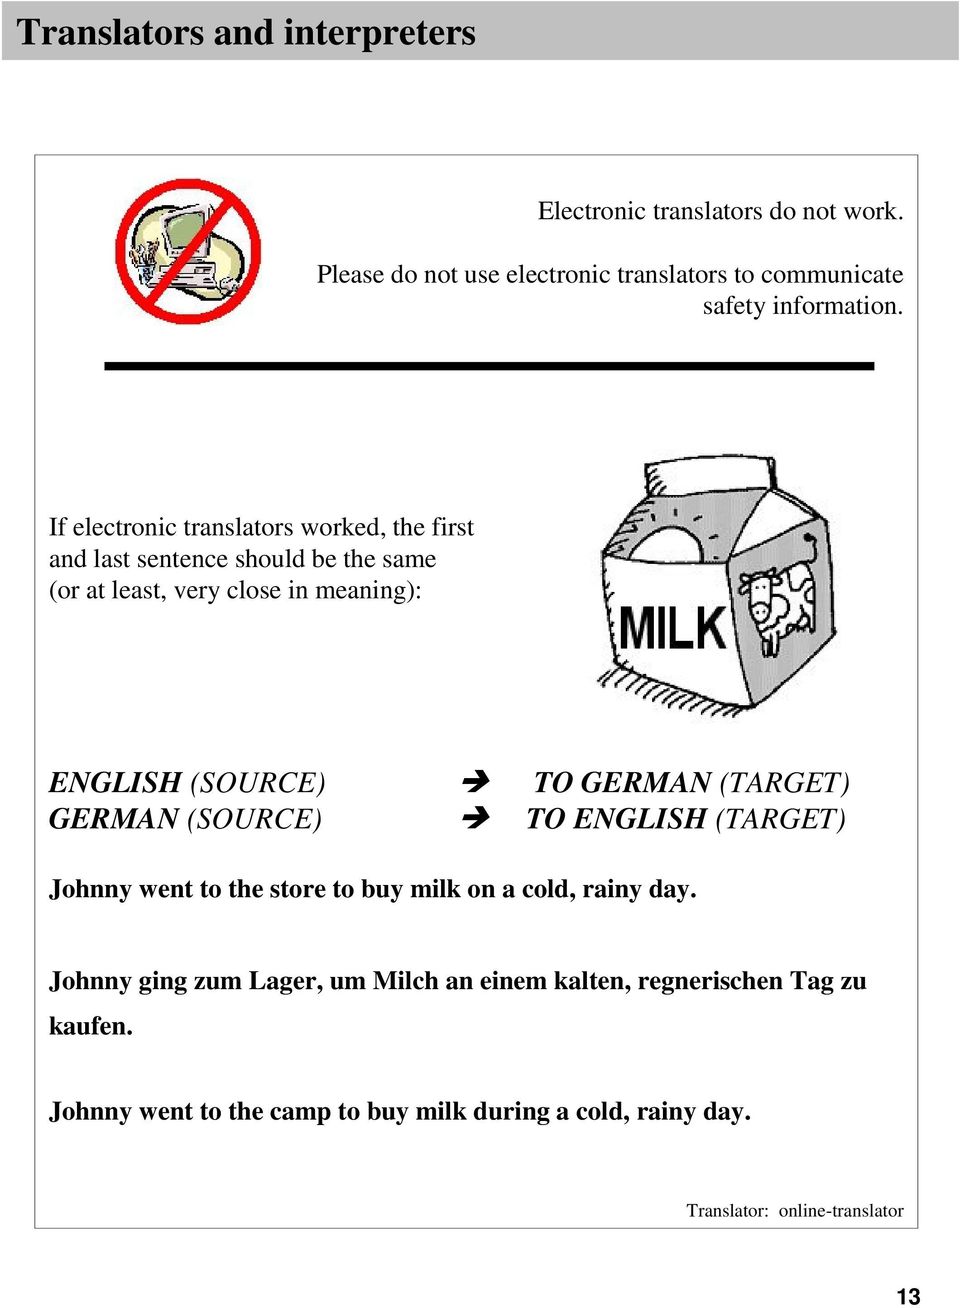 GERMAN (TARGET) GERMAN (SOURCE) TO ENGLISH (TARGET) Johnny went to the store to buy milk on a cold, rainy day.